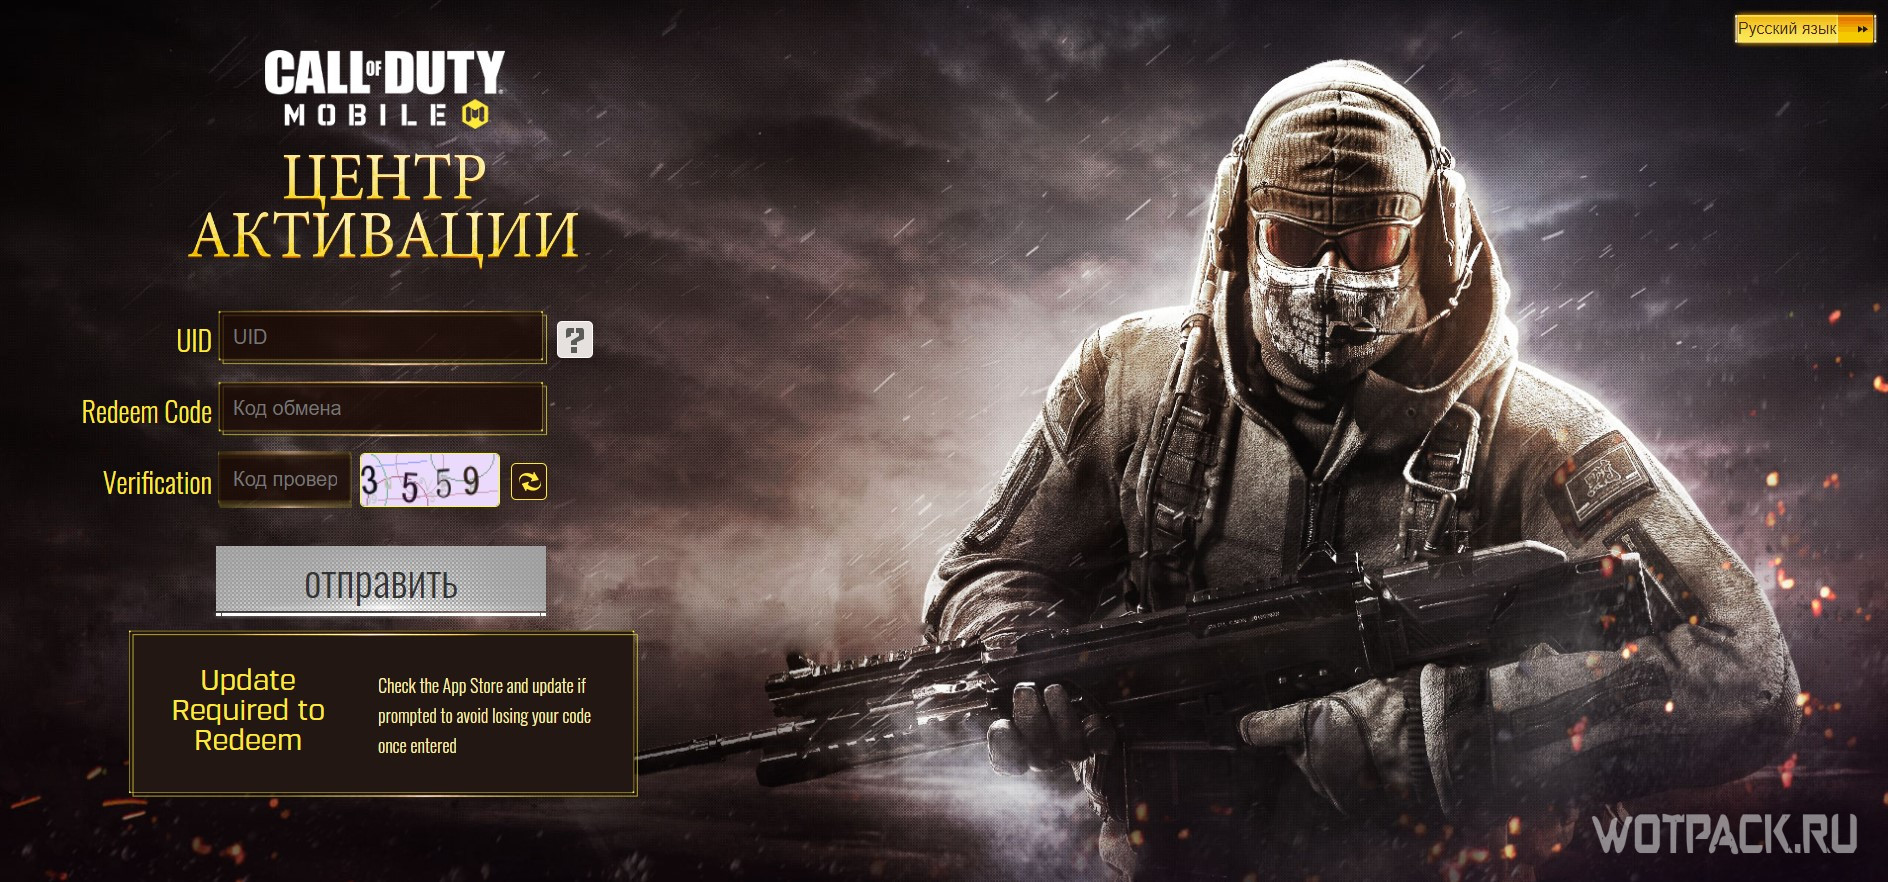 Call of Duty: Mobile